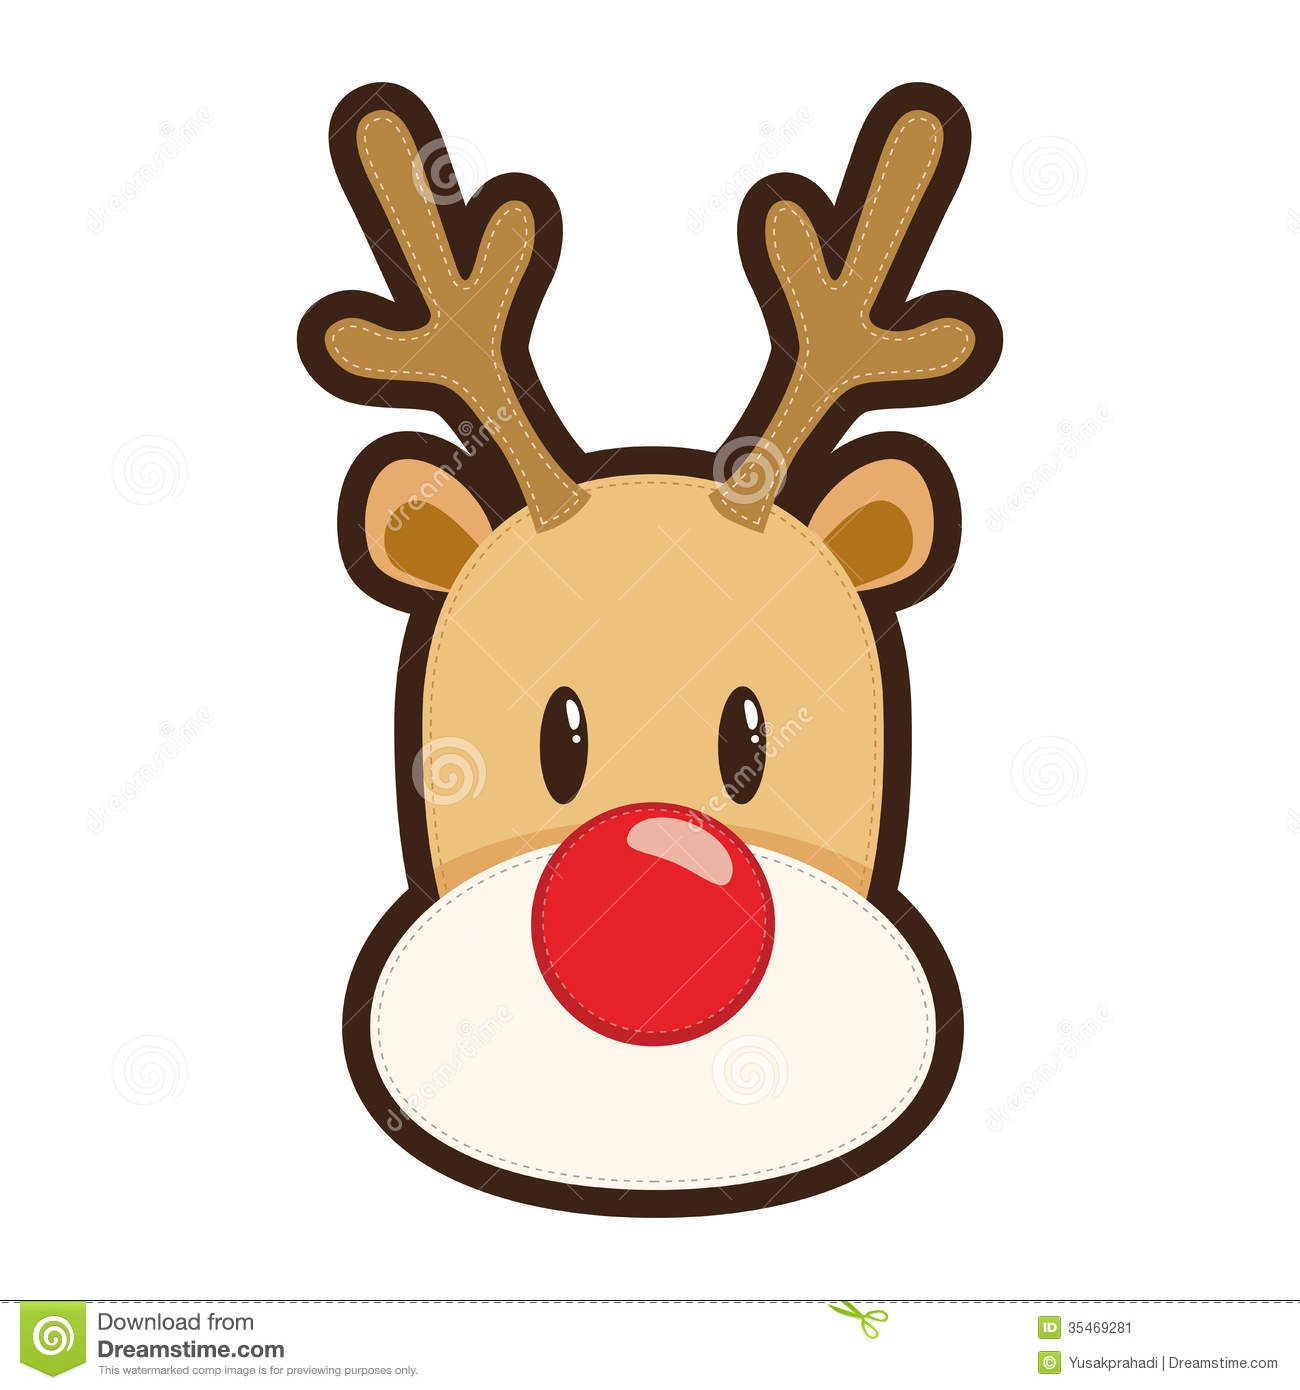 Cartoon Illustration Of Rudolph The Red Nosed Reindeer White.